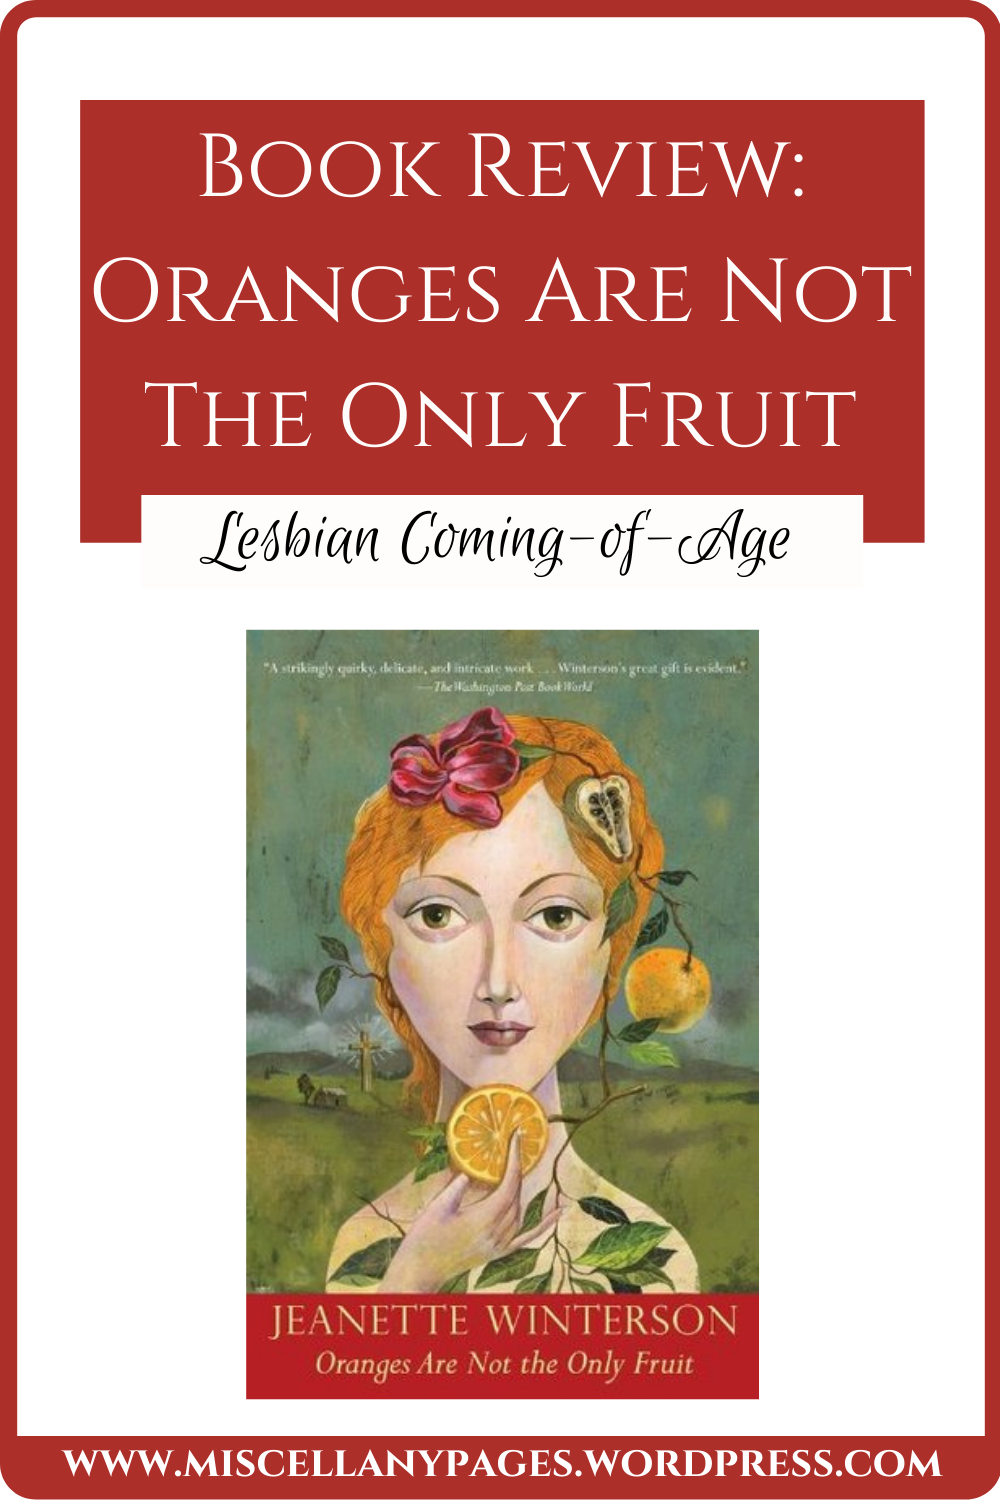 Oranges Are Not the Only Fruit by Jeanette Winterson Book Review Pinterest Graphic